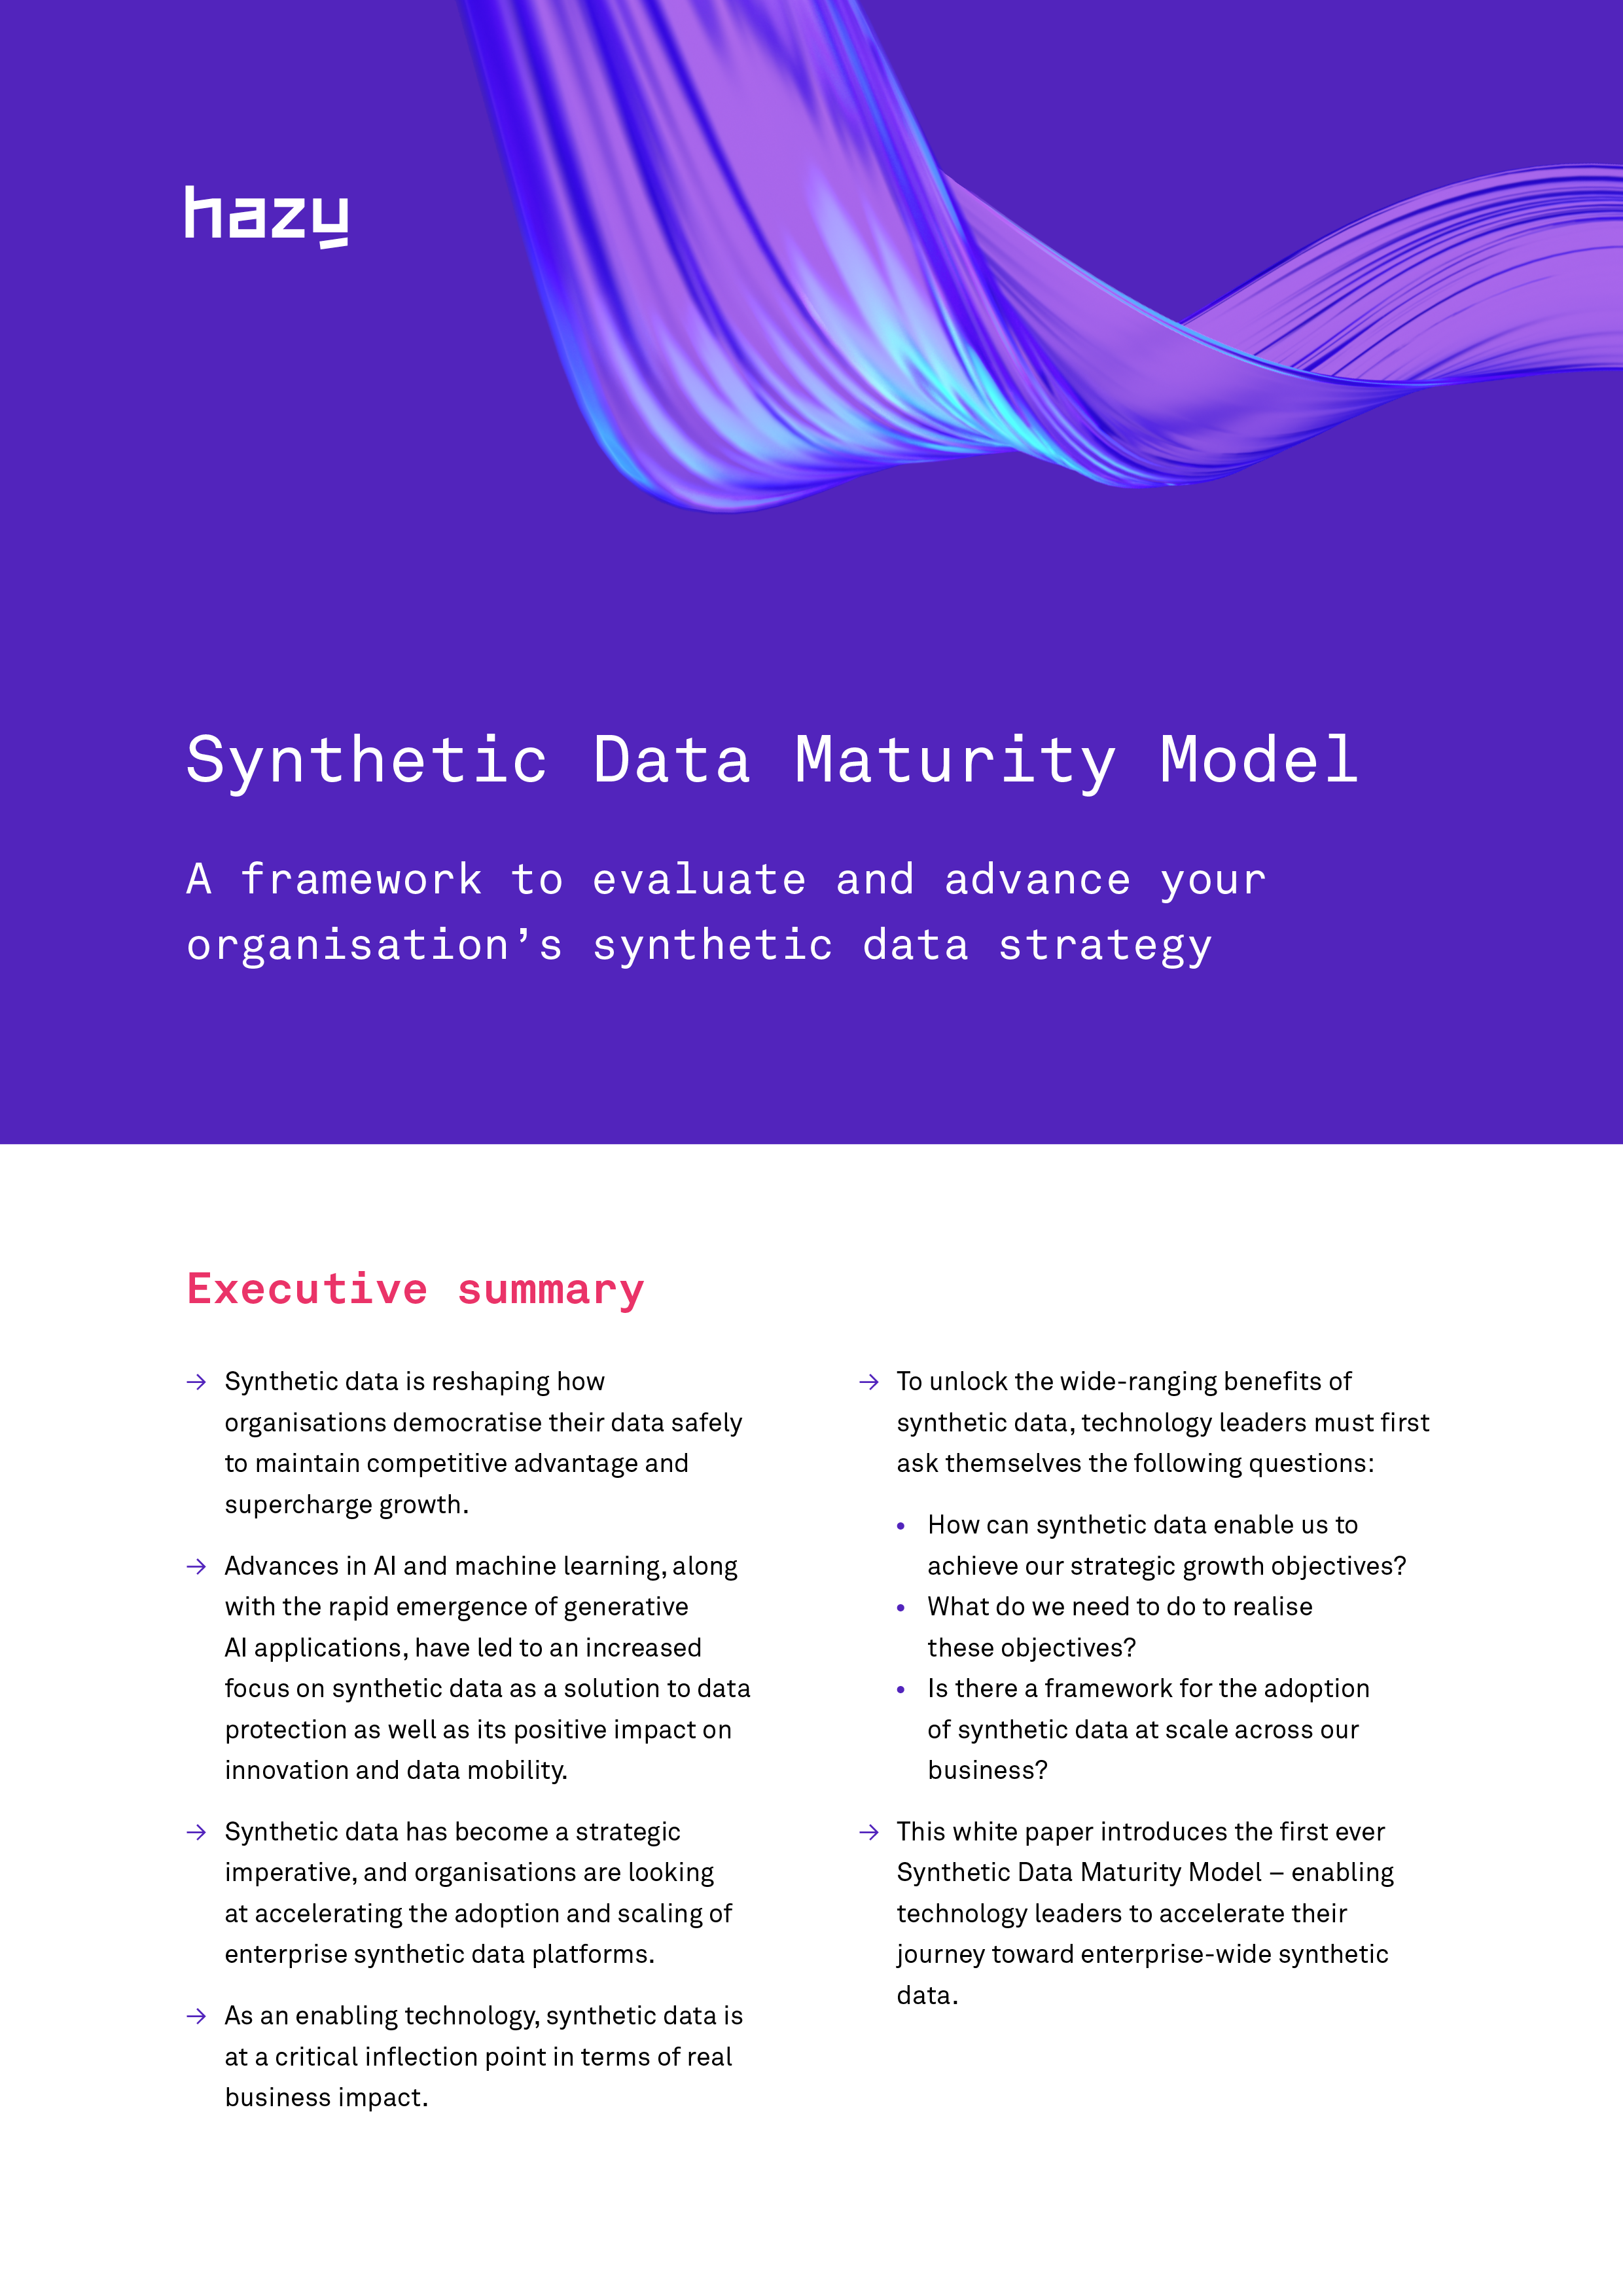 Synthetic Data MAturity Model front page